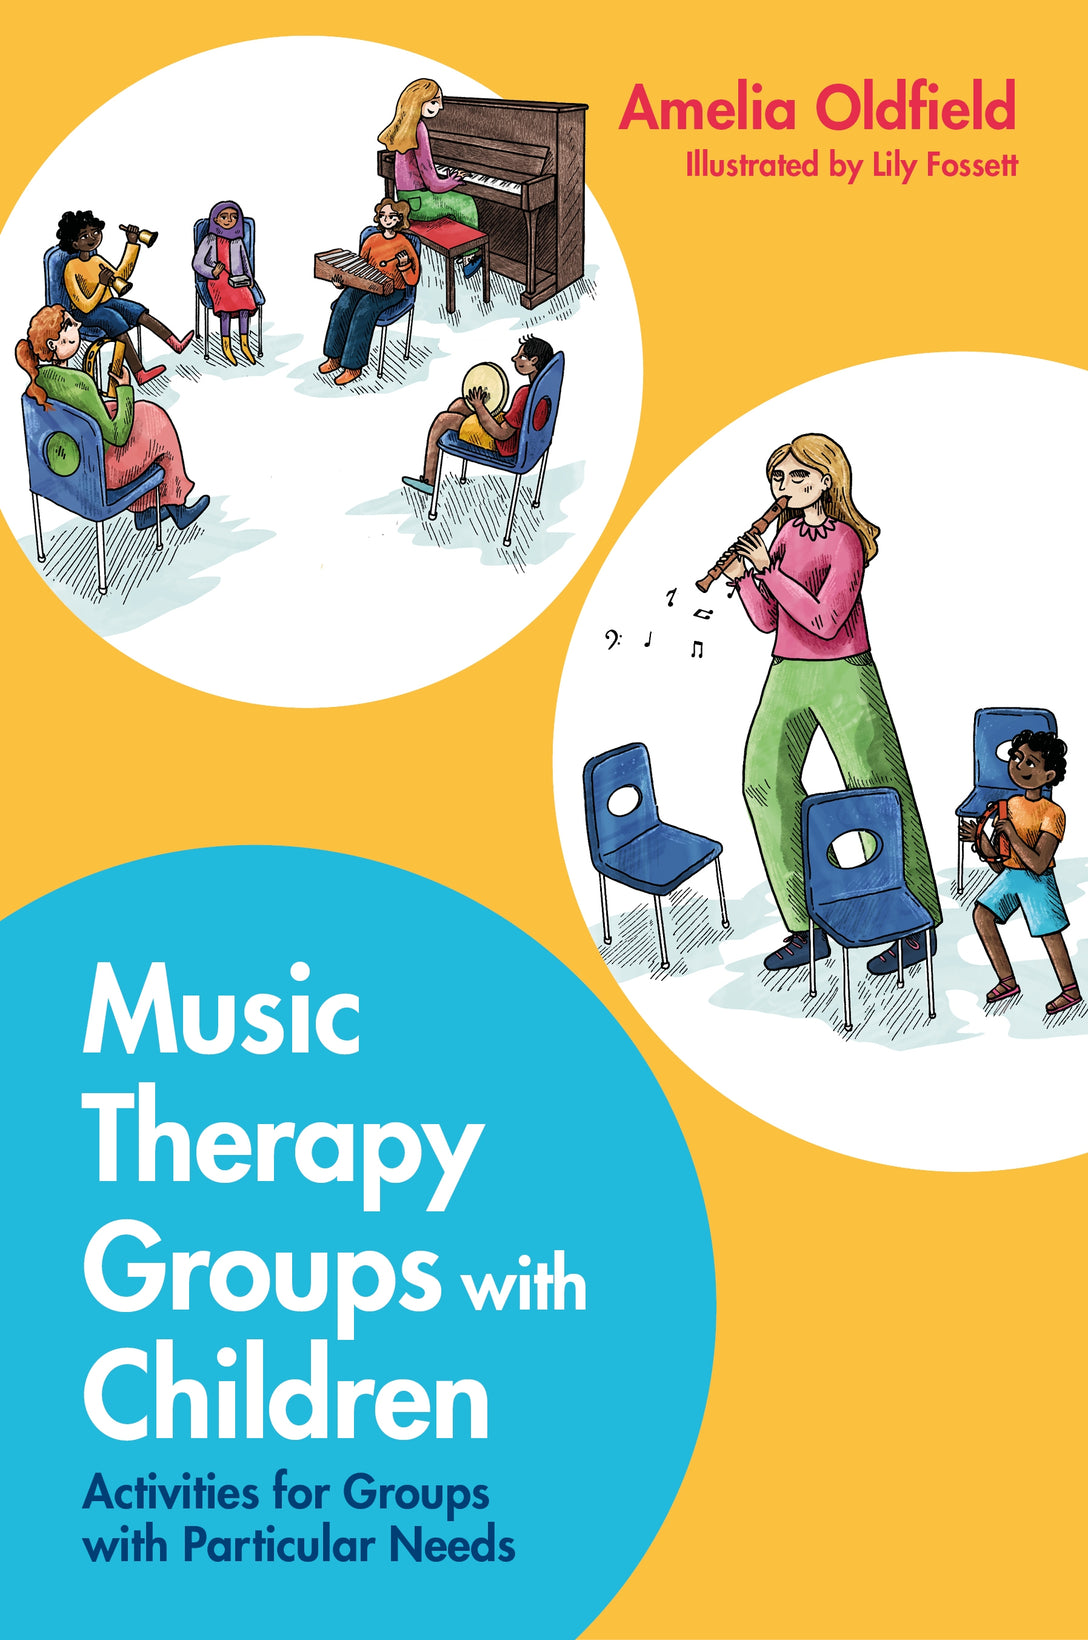 Music Therapy Groups with Children by Lily Fossett, Amelia Oldfield